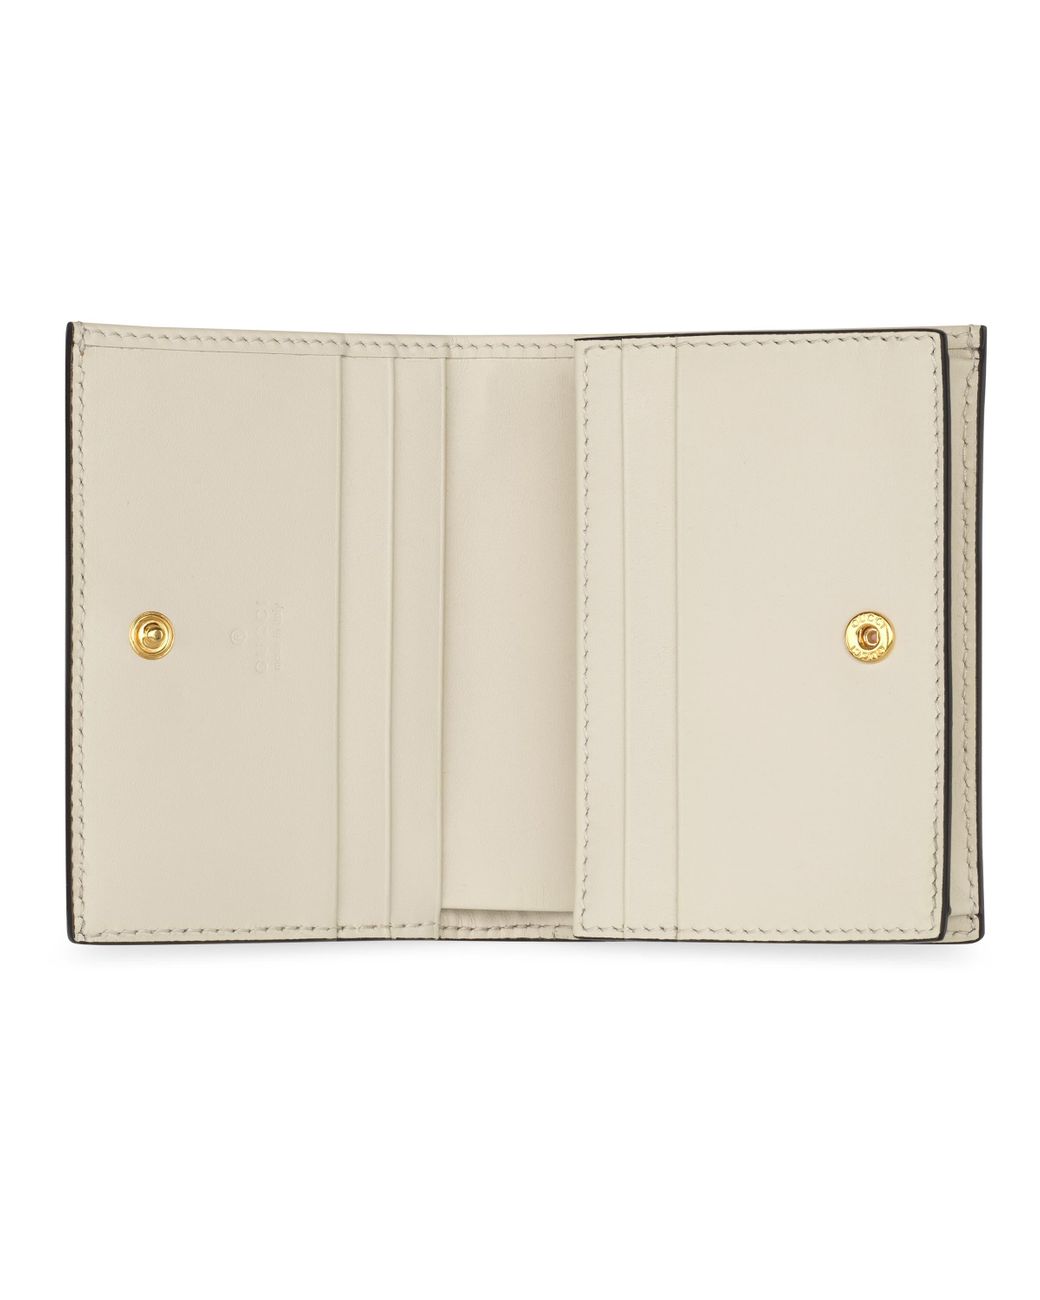 Gucci Les Pommes Card Case Wallet in Natural | Lyst